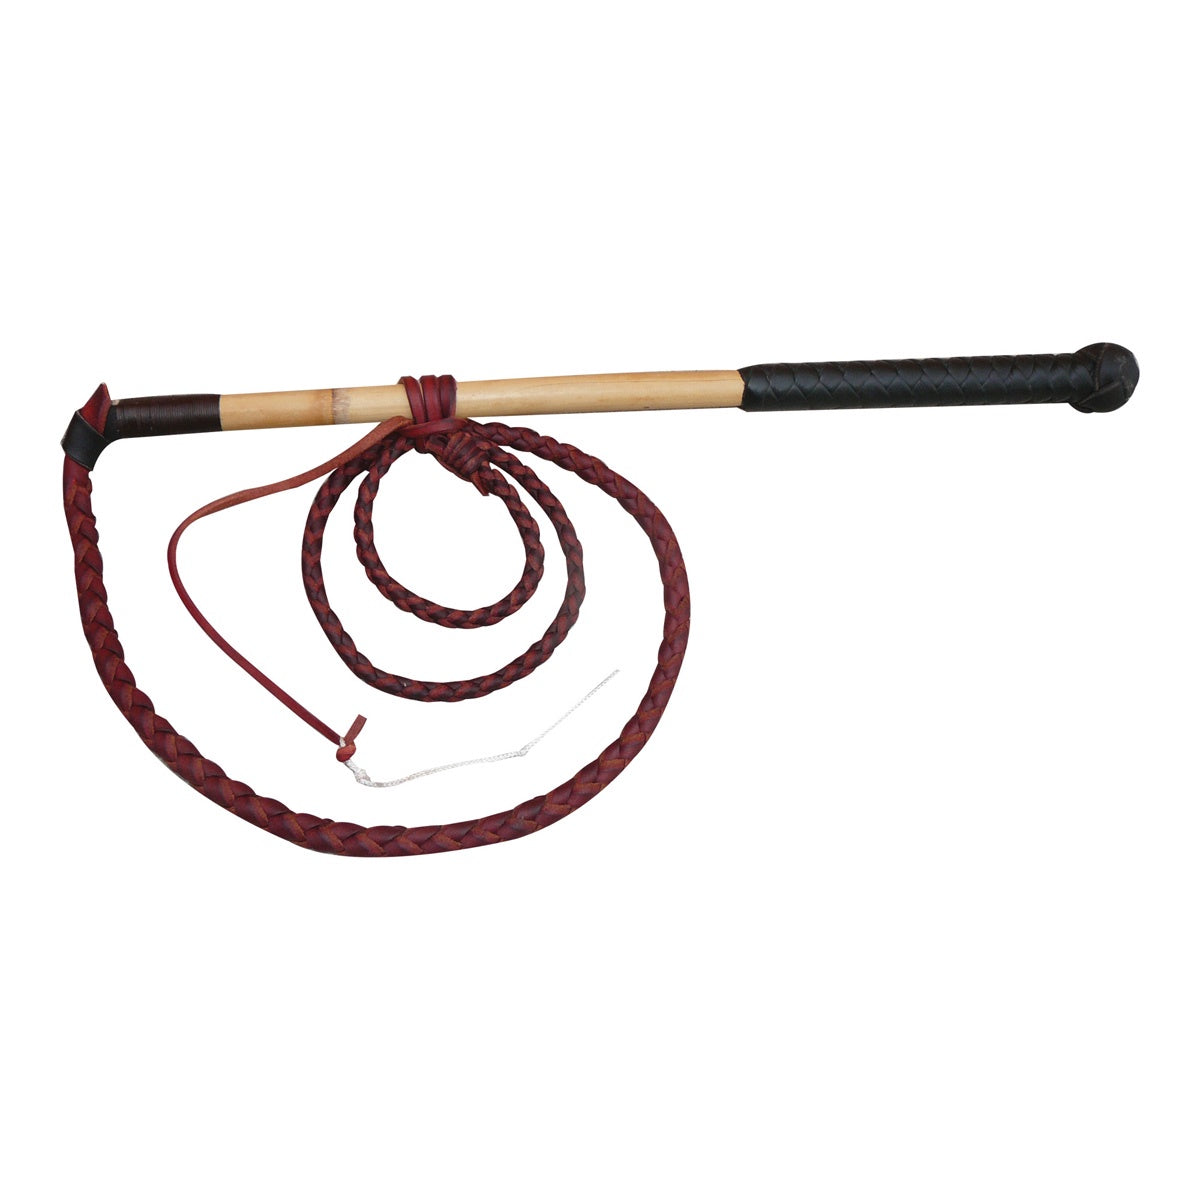 McAlister 4 Plait Redhide Yard Whip 4' (6613051834445)